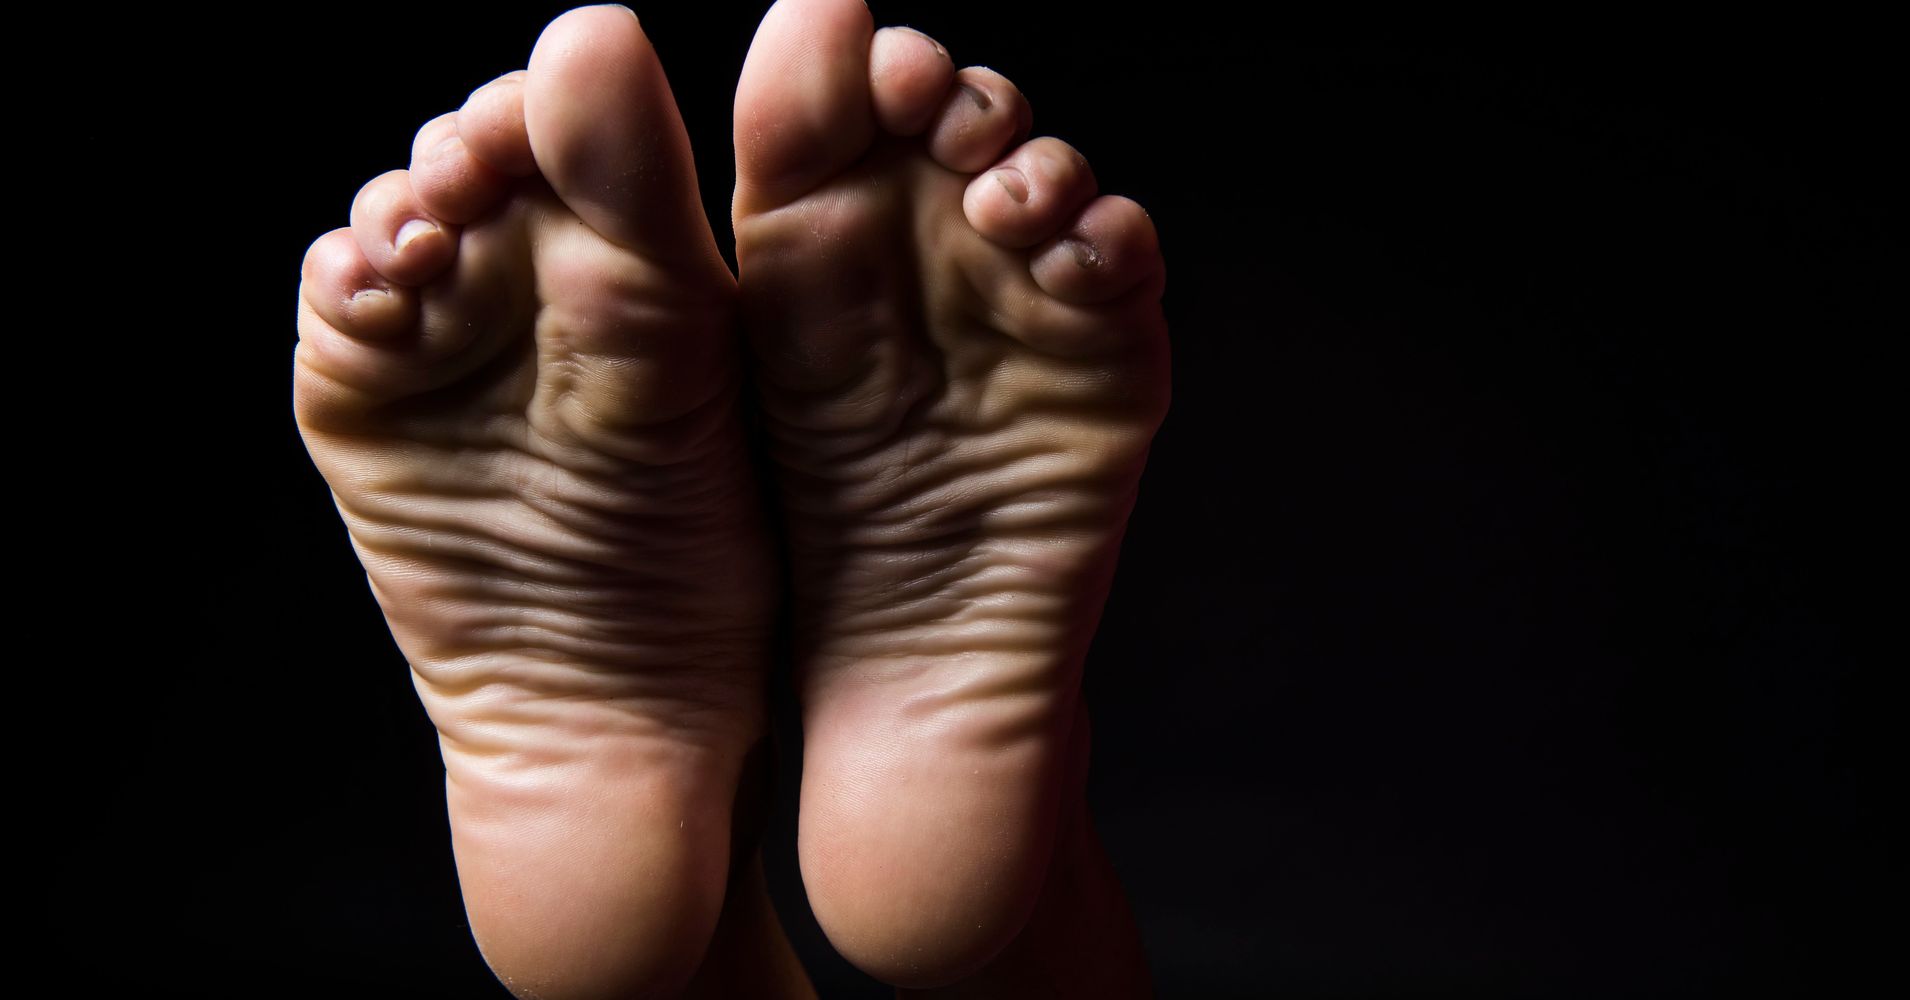 These Honest Images Show How Women Really Feel About Their Feet